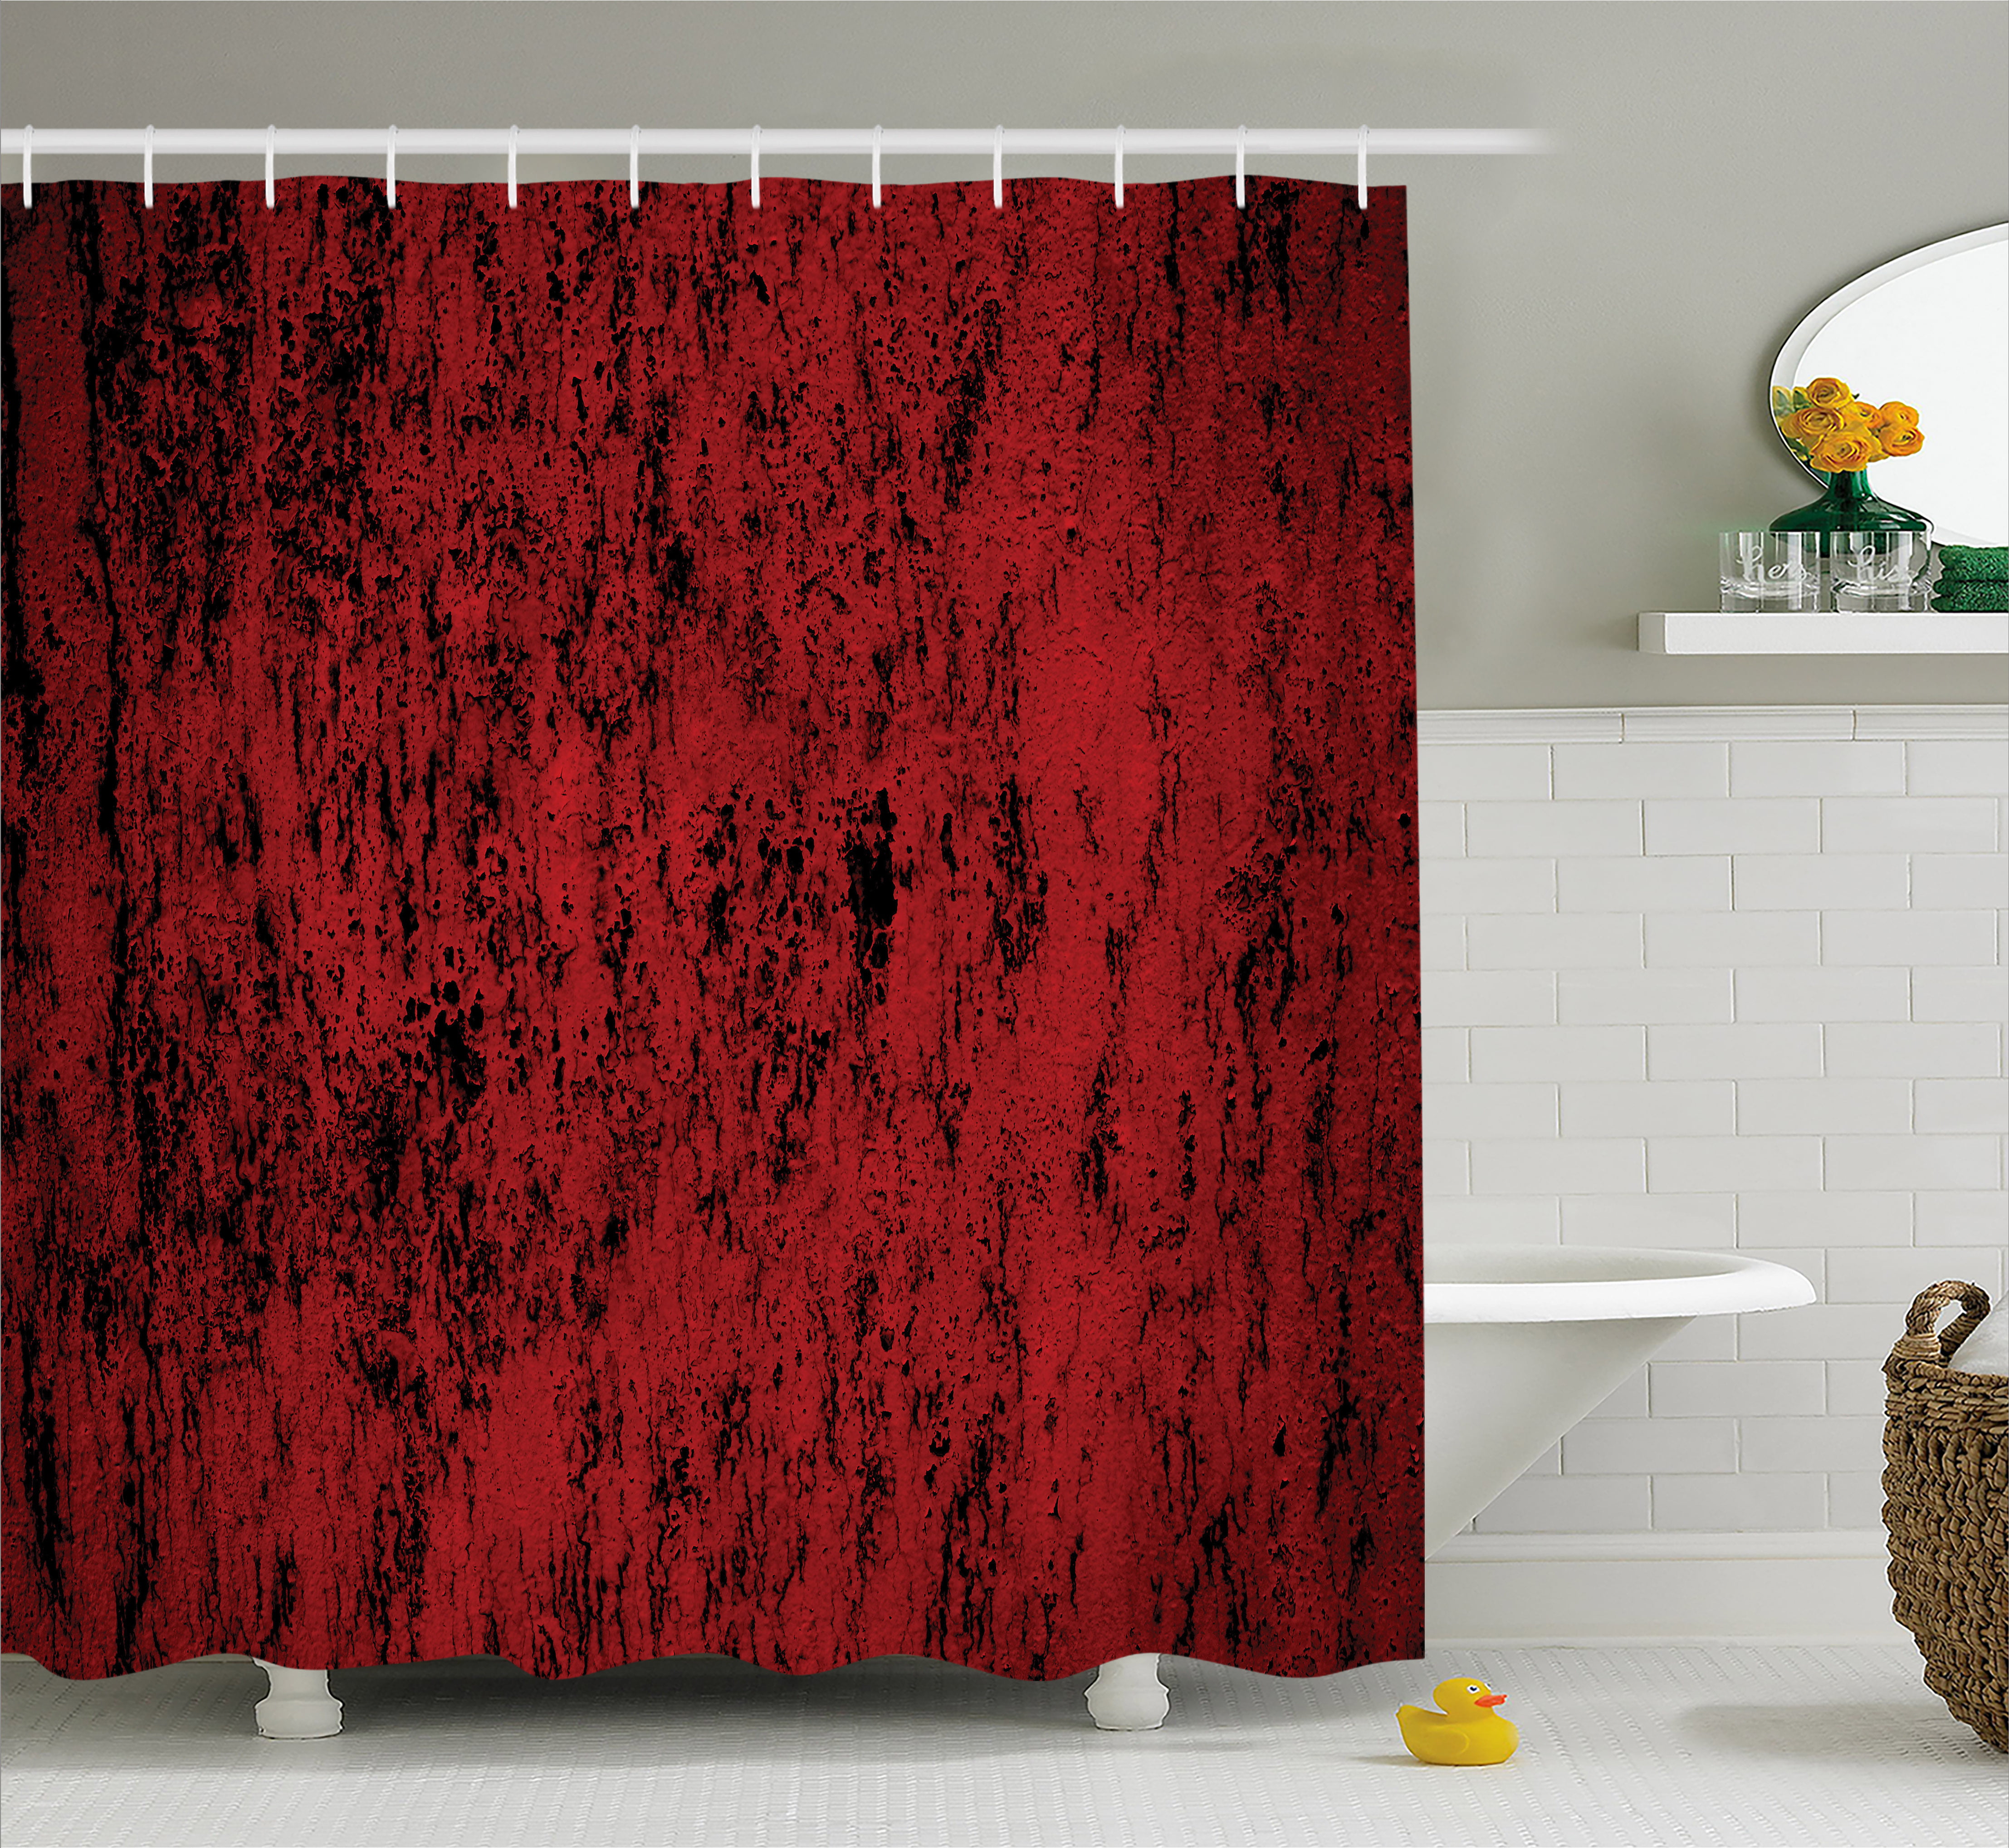 Red and Black Shower Curtain, Artistic Abstract Pattern